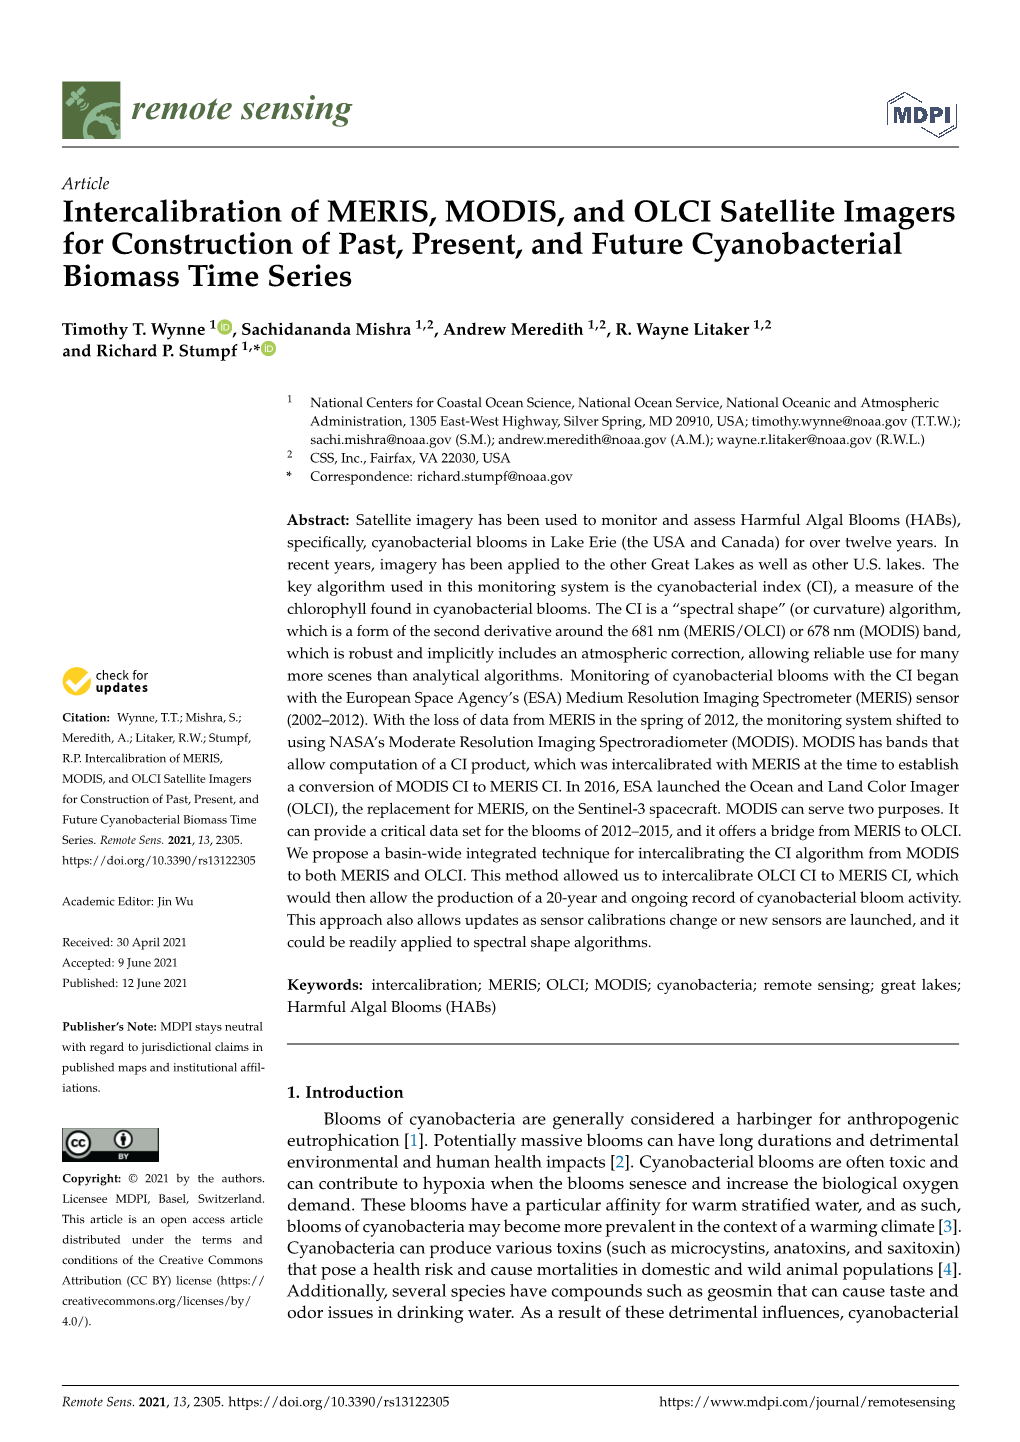 Intercalibration of MERIS, MODIS, and OLCI Satellite Imagers for Construction of Past, Present, and Future Cyanobacterial Biomass Time Series